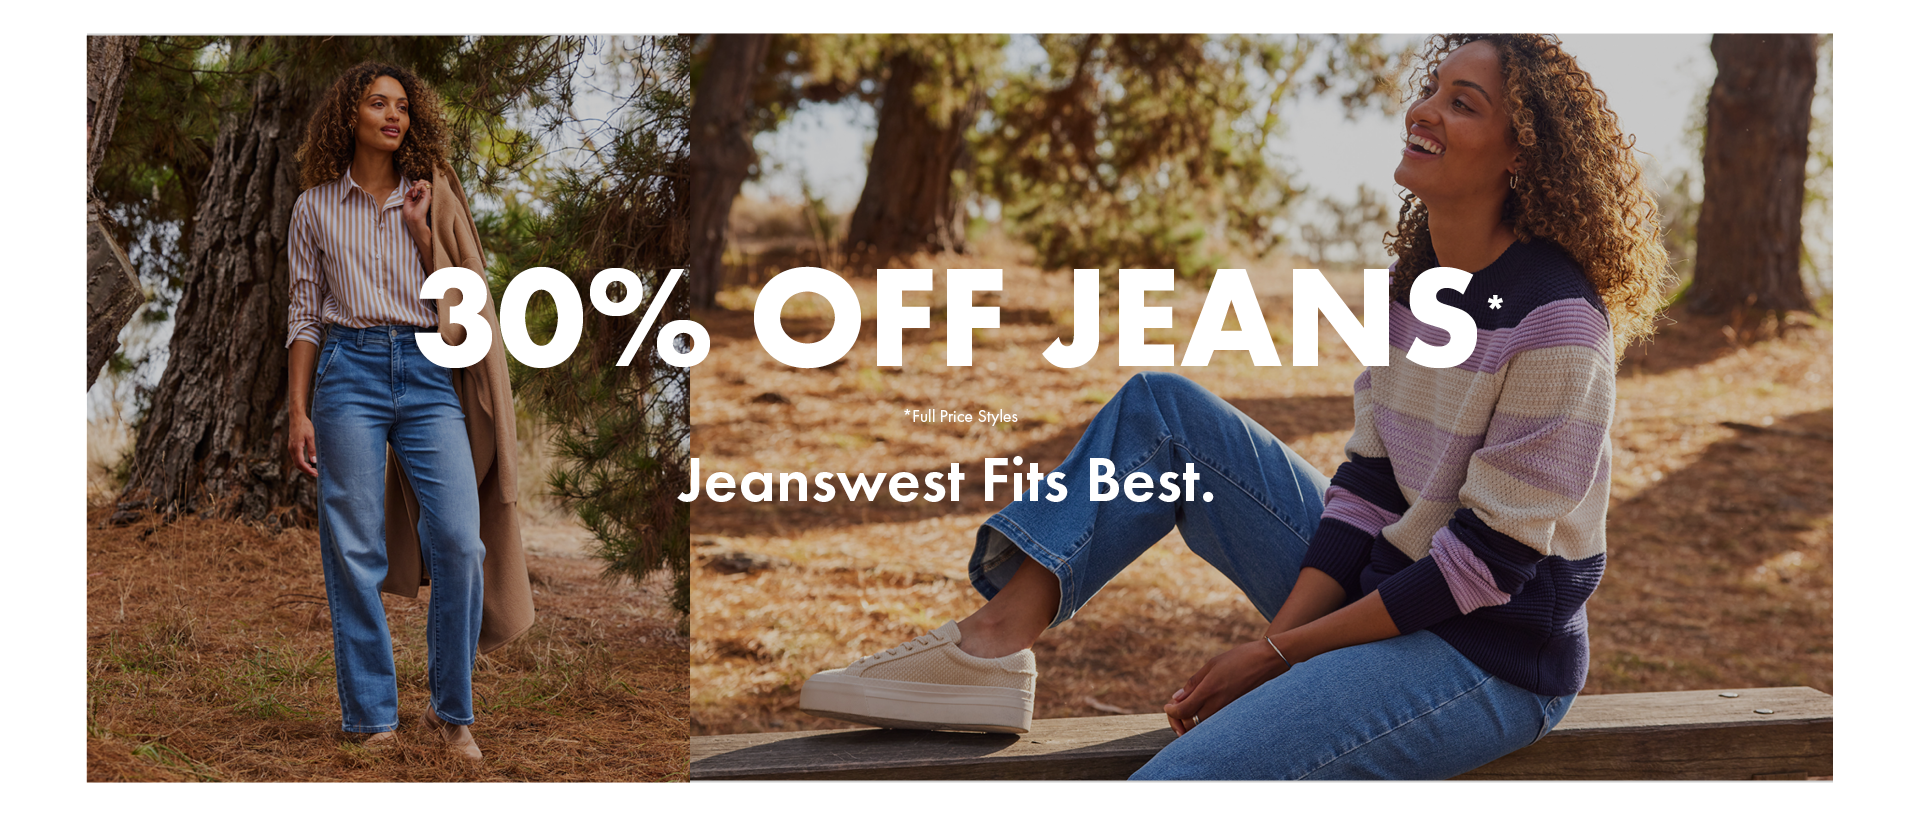 Sale Frenzy - 30% off Jeans*